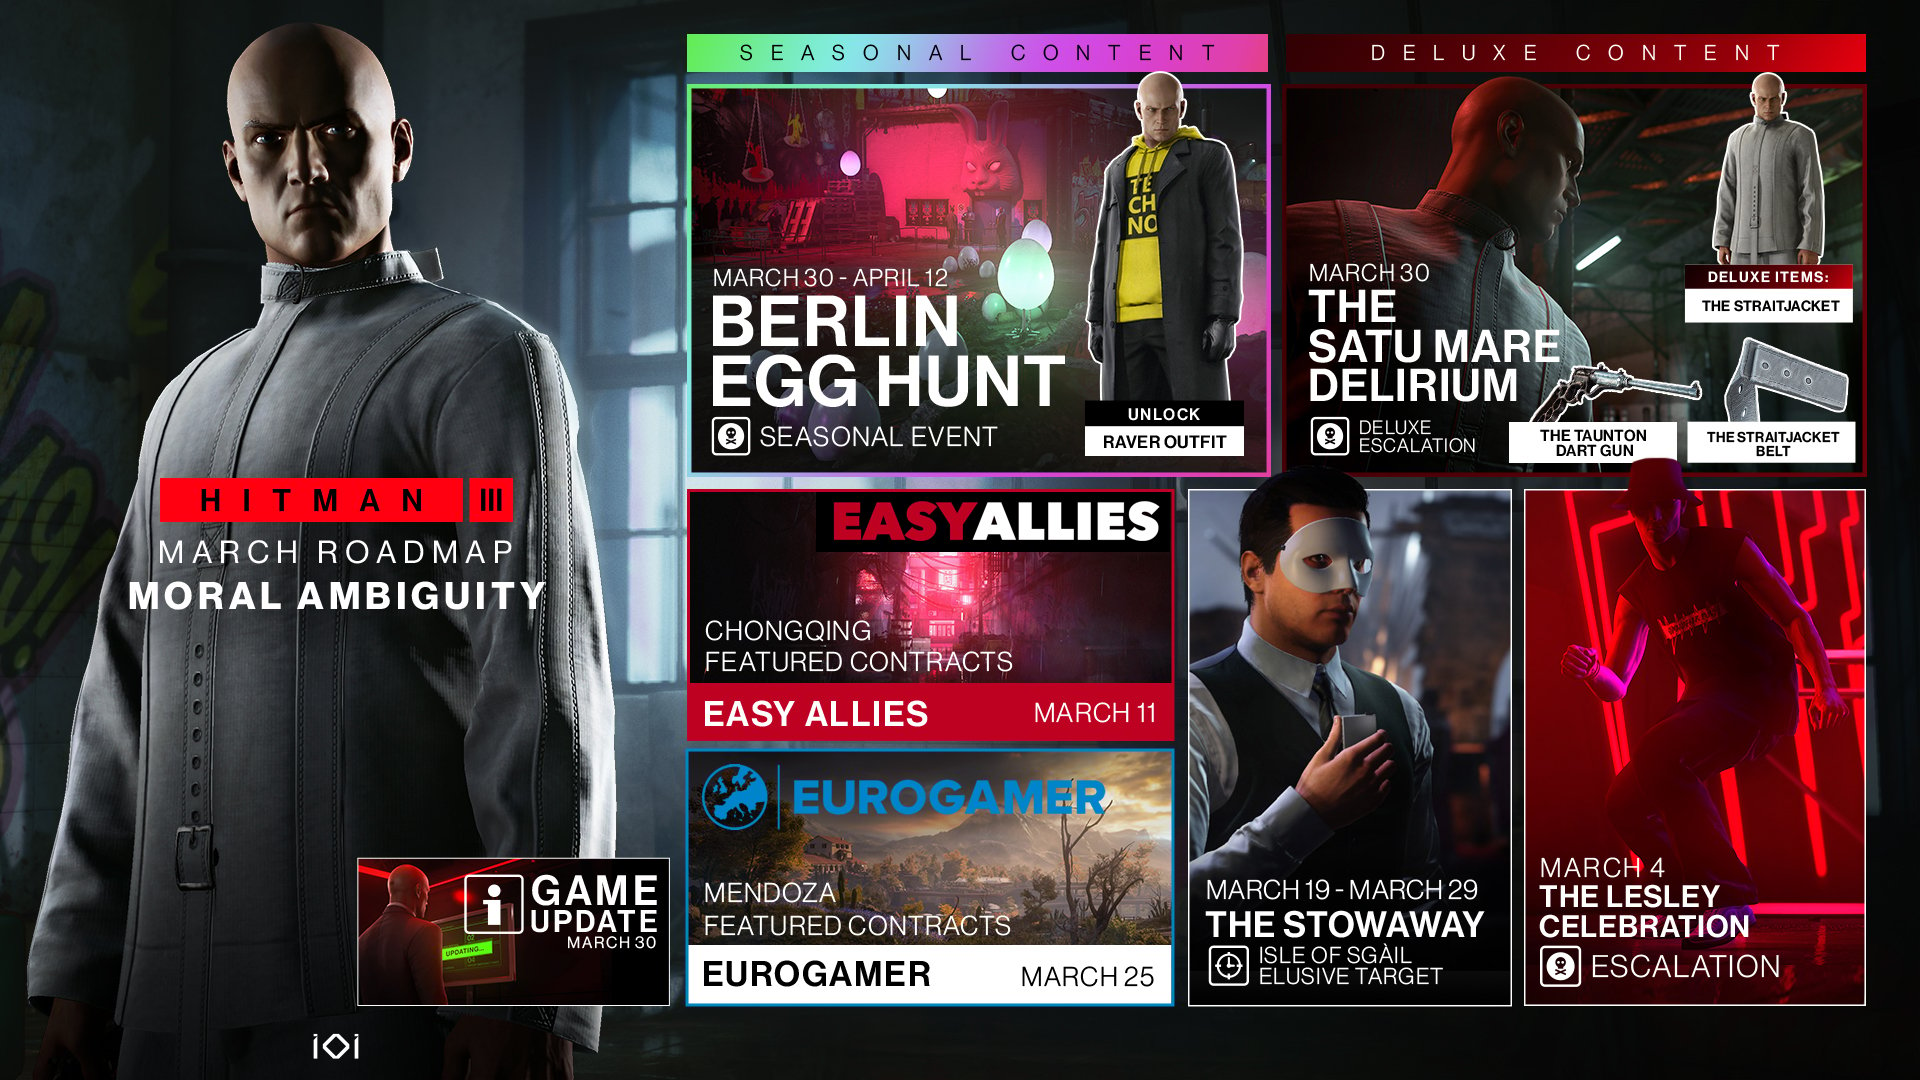 Hitman 3’s March content roadmap includes the game’s first seasonal event VGC